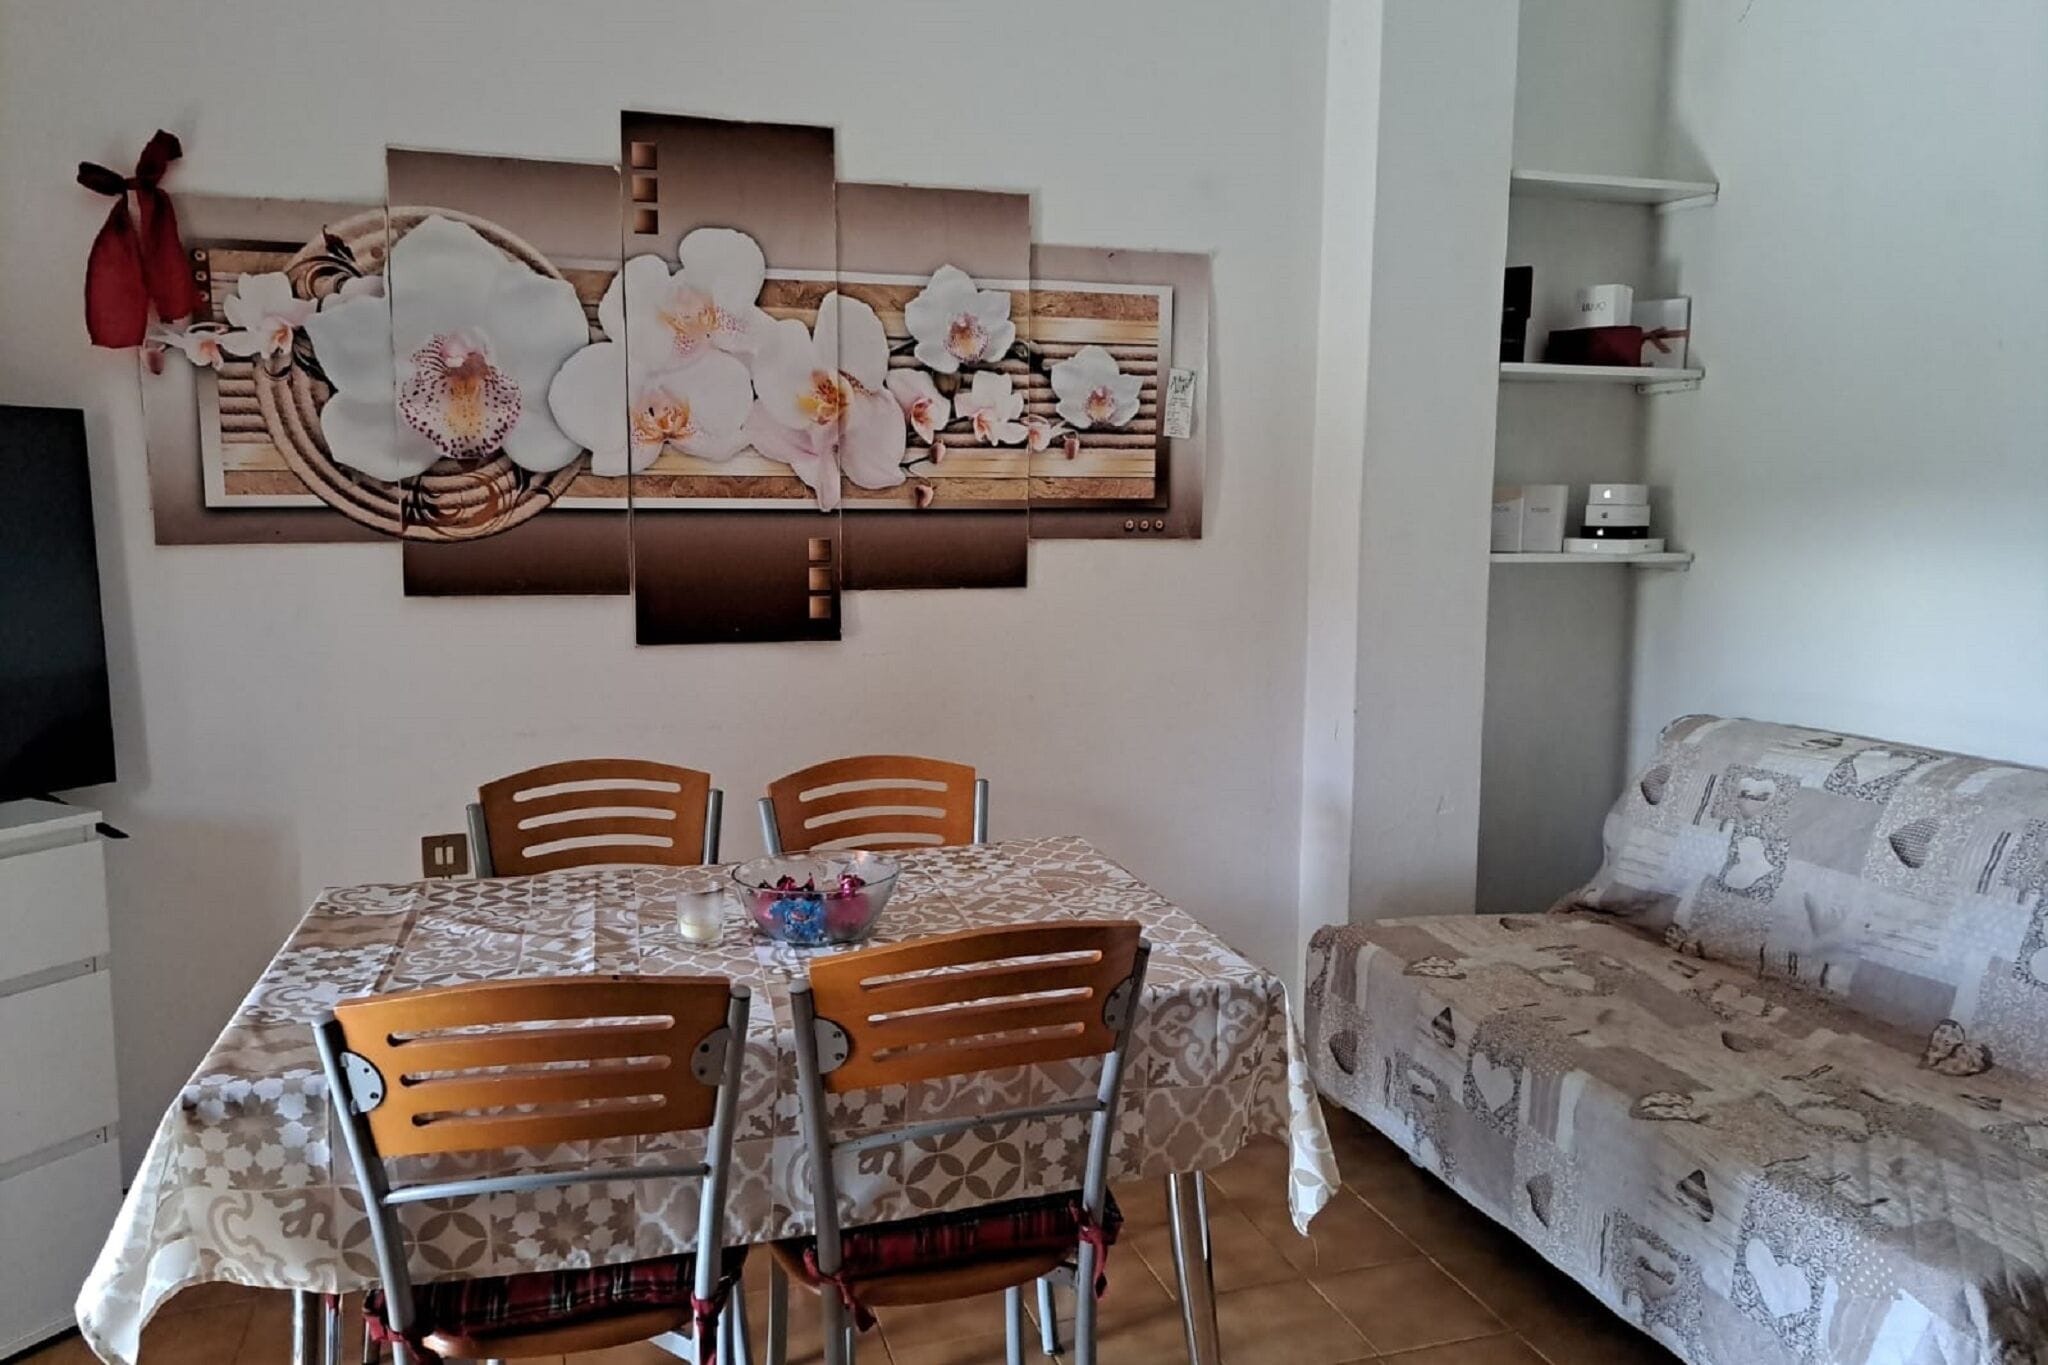 Pleasant apartment in Stintino with large verandas and garden